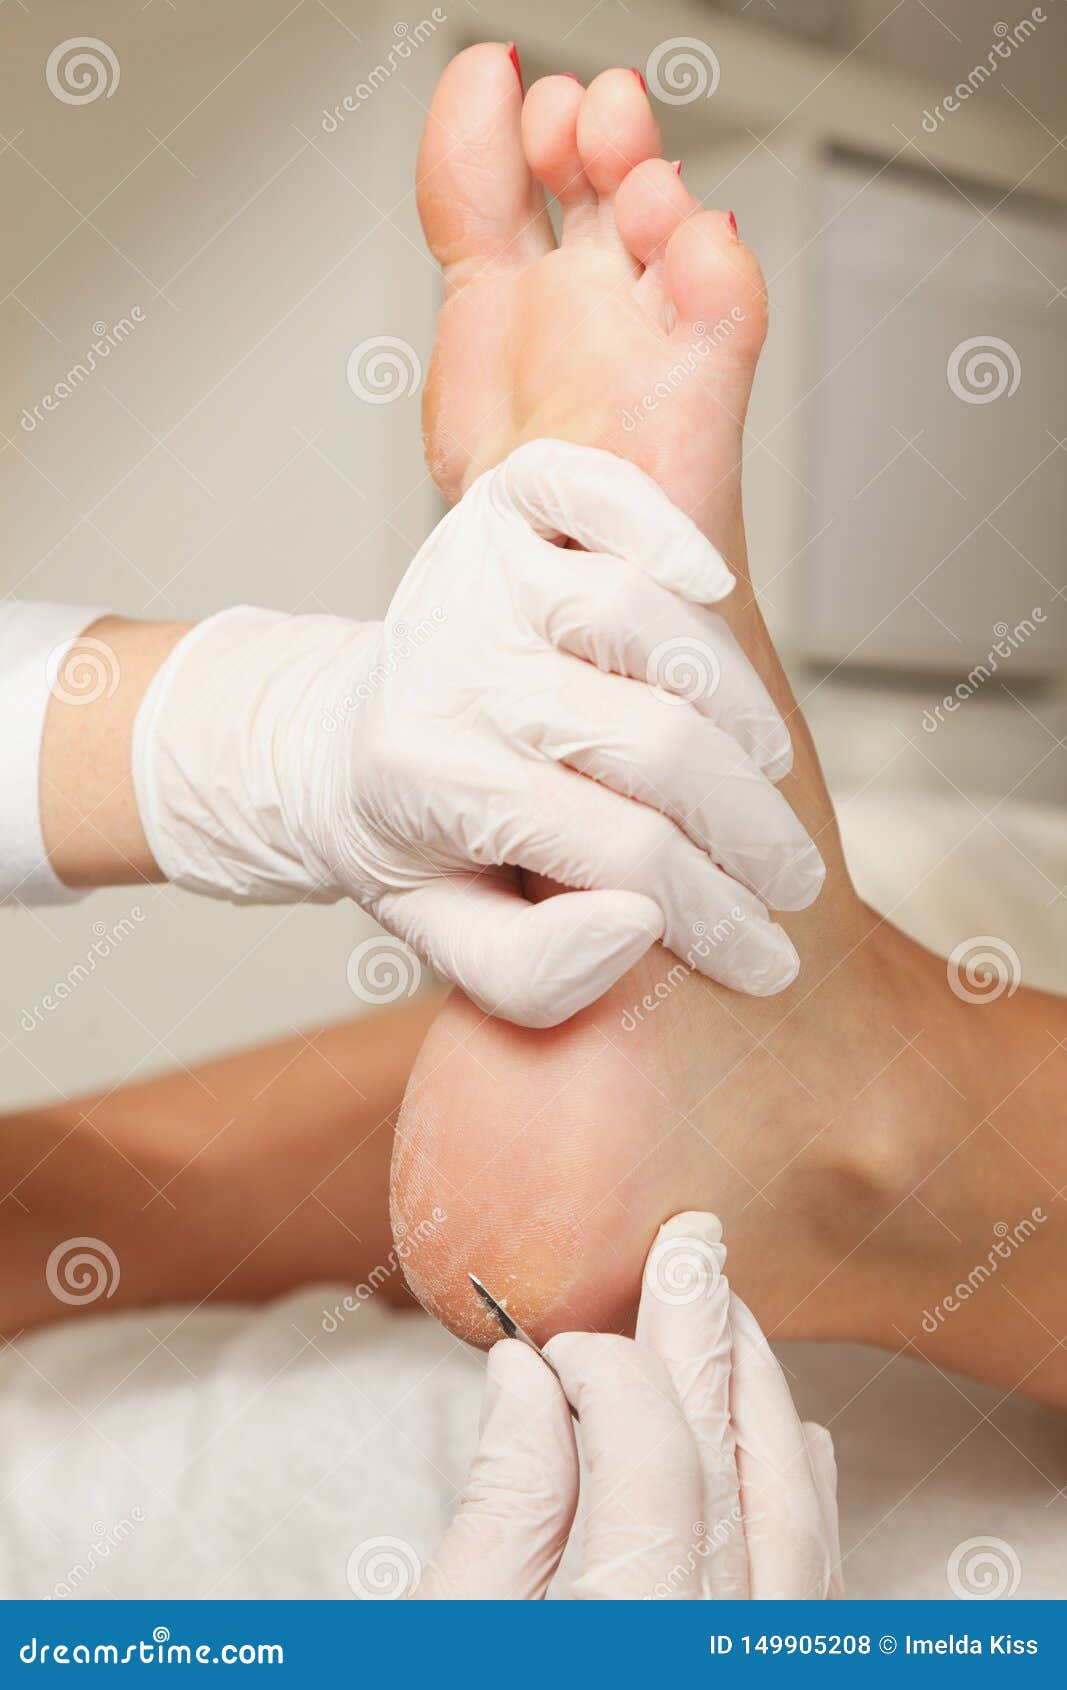 chiropodist removes skin on a wart with